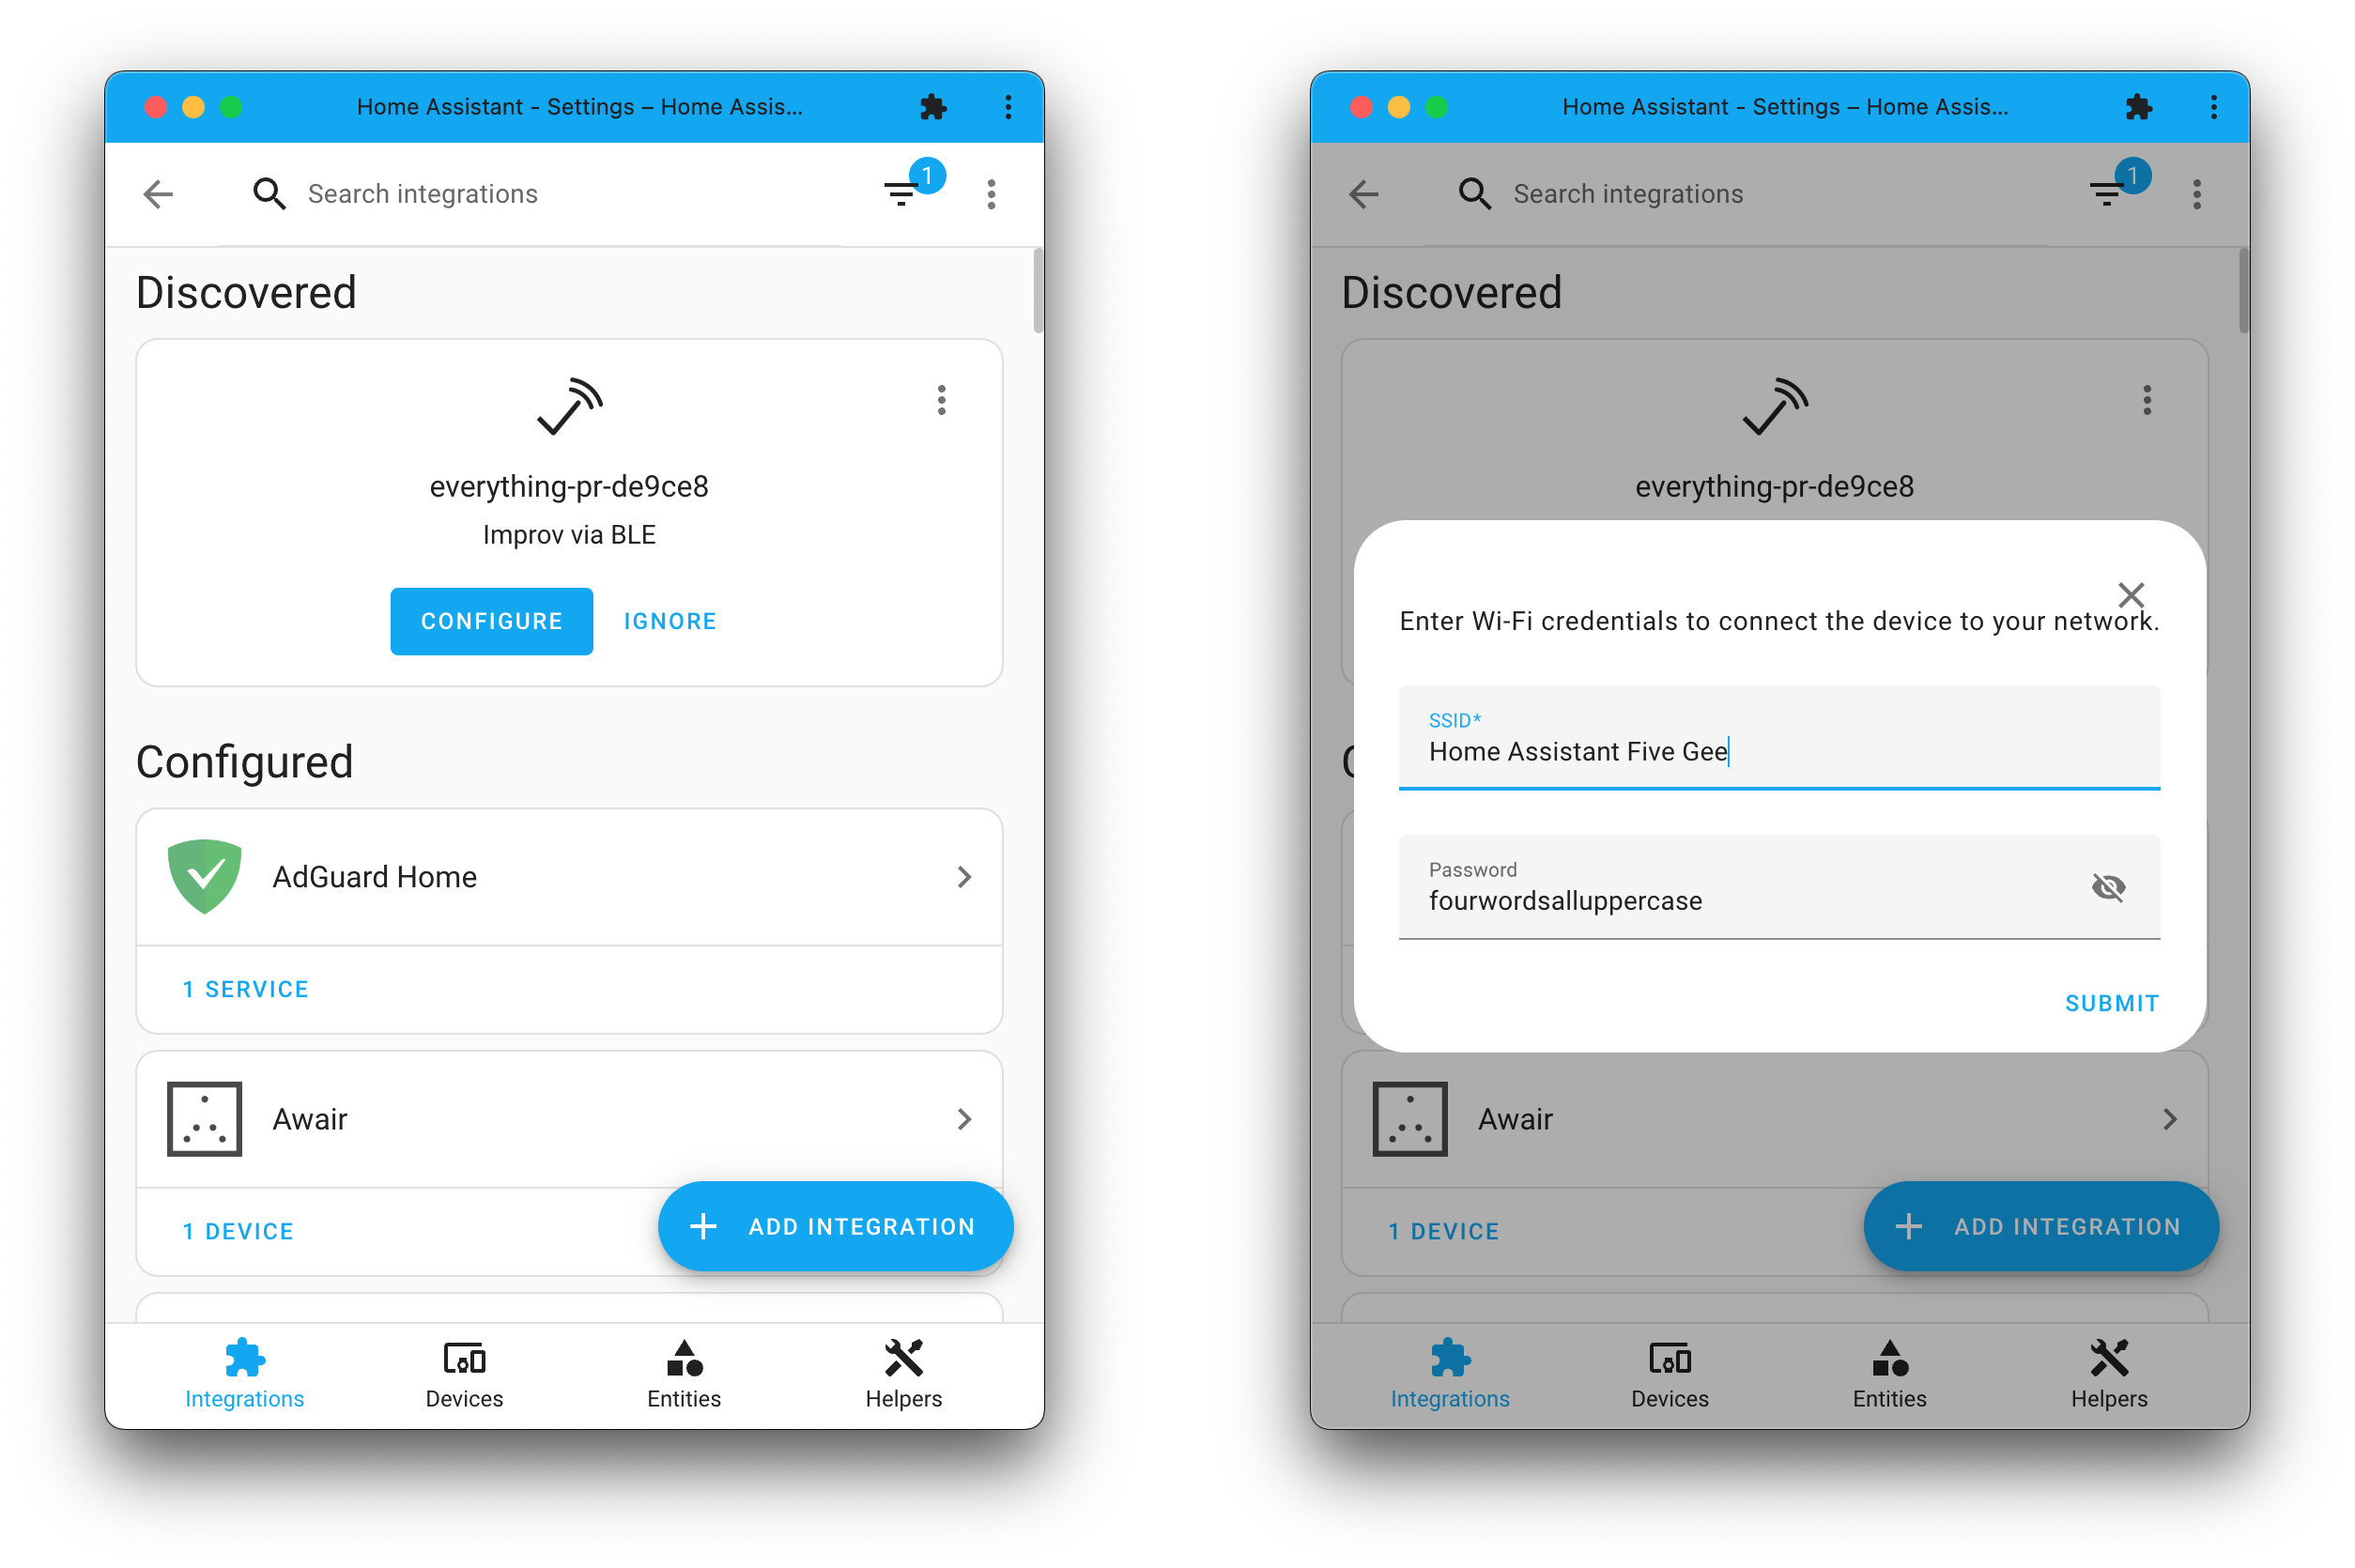 Screenshot showing a discovered Improv Wi-Fi device over Bluetooth, which can be set up and added to your Wi-Fi network straight from Home Assistant.